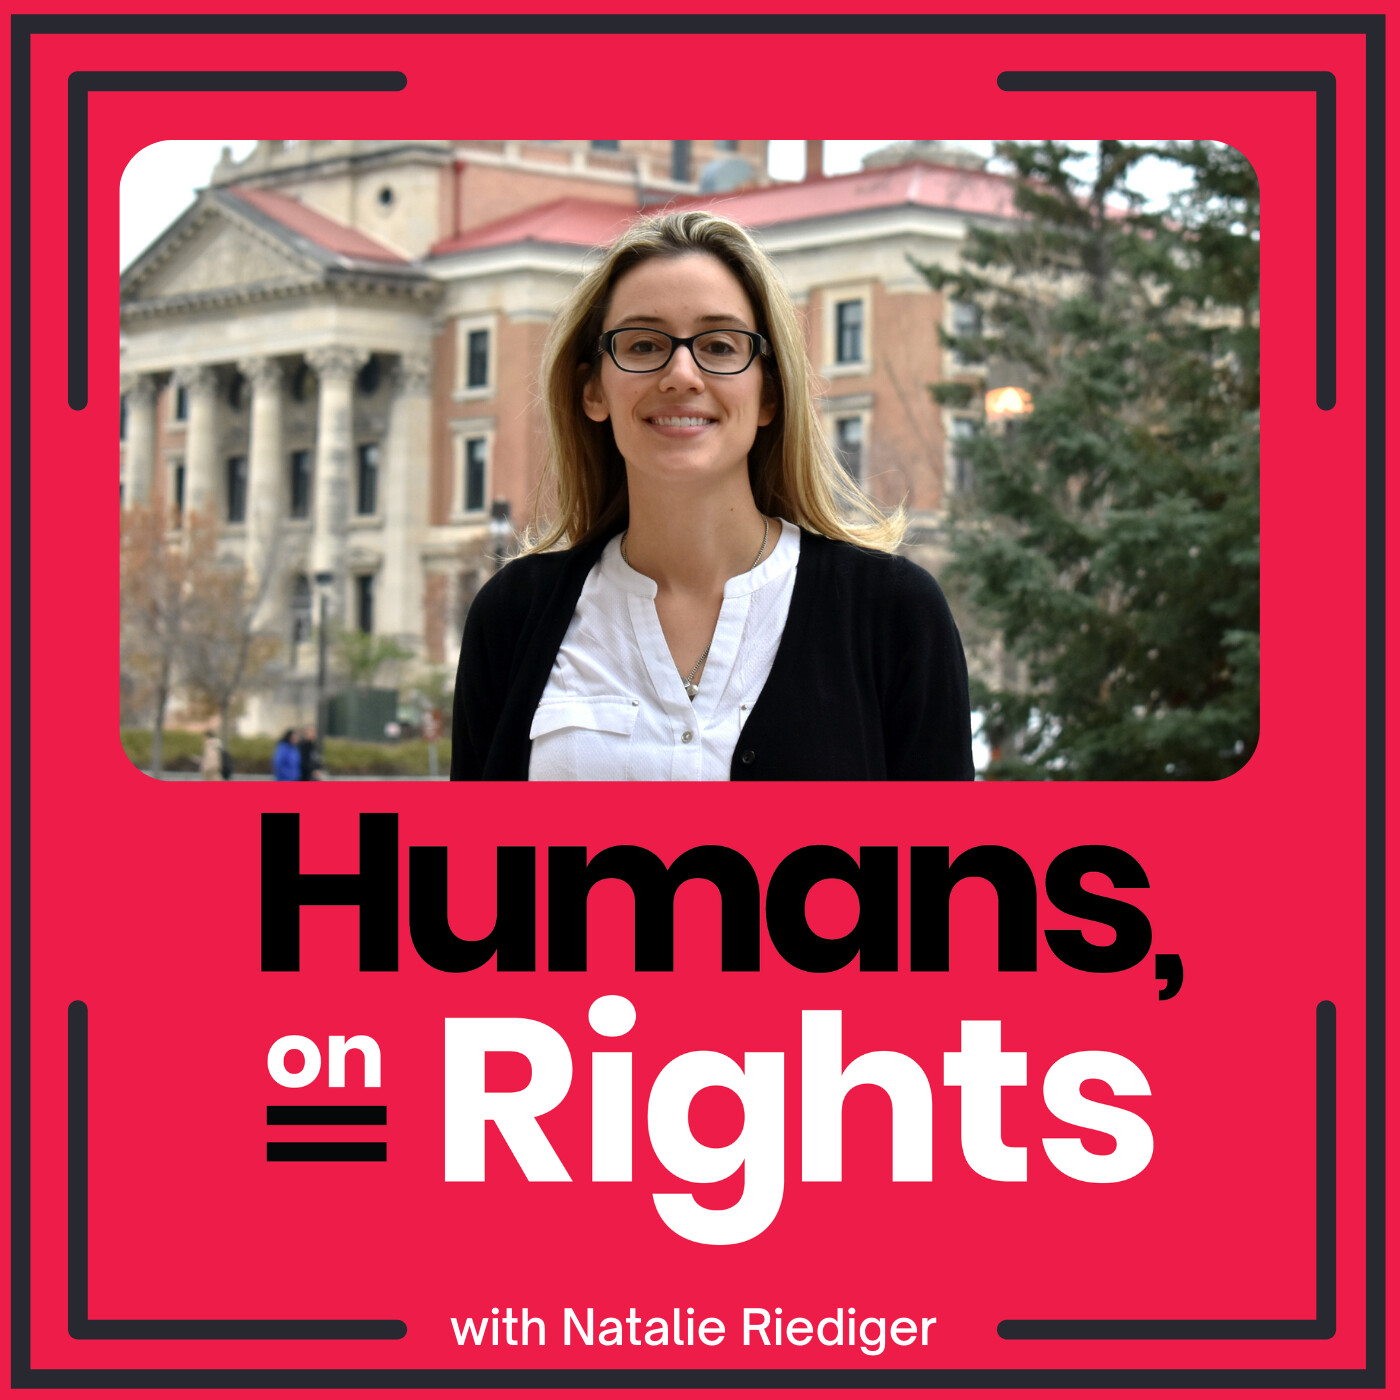 Food: Security and Insecurity with Dr. Natalie Riediger